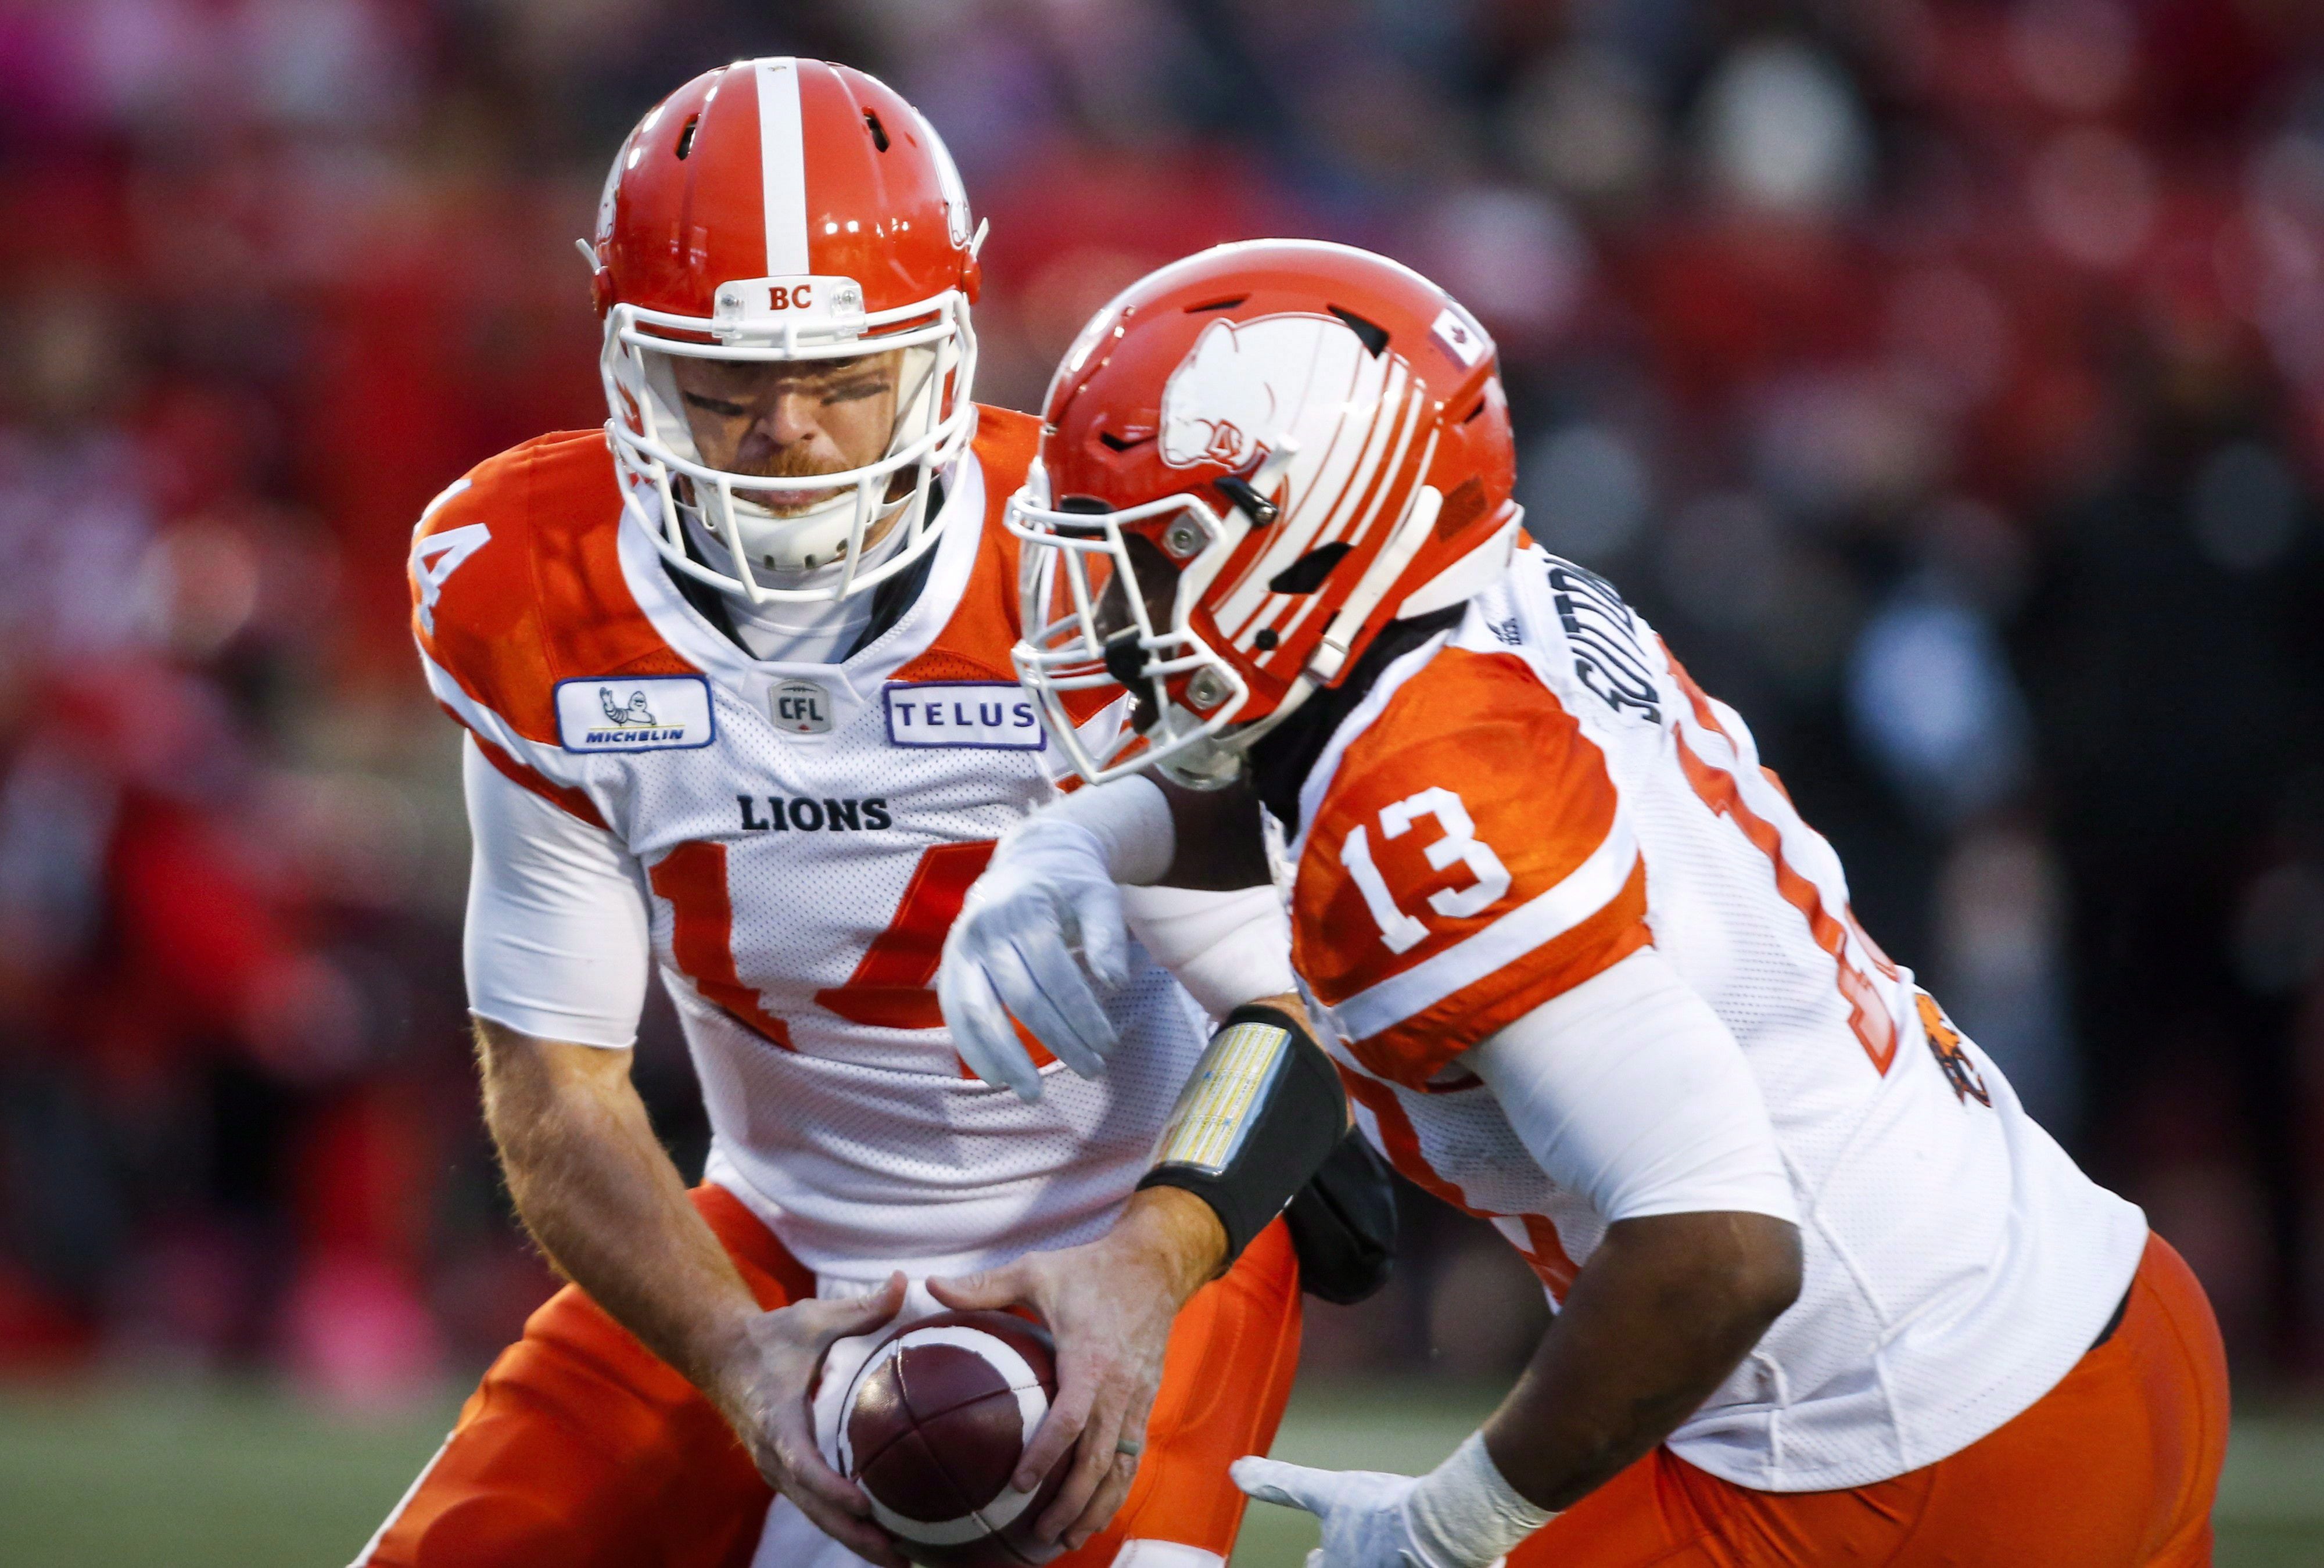 BC Lions hopeful playoff berth lies on the other side of Edmonton